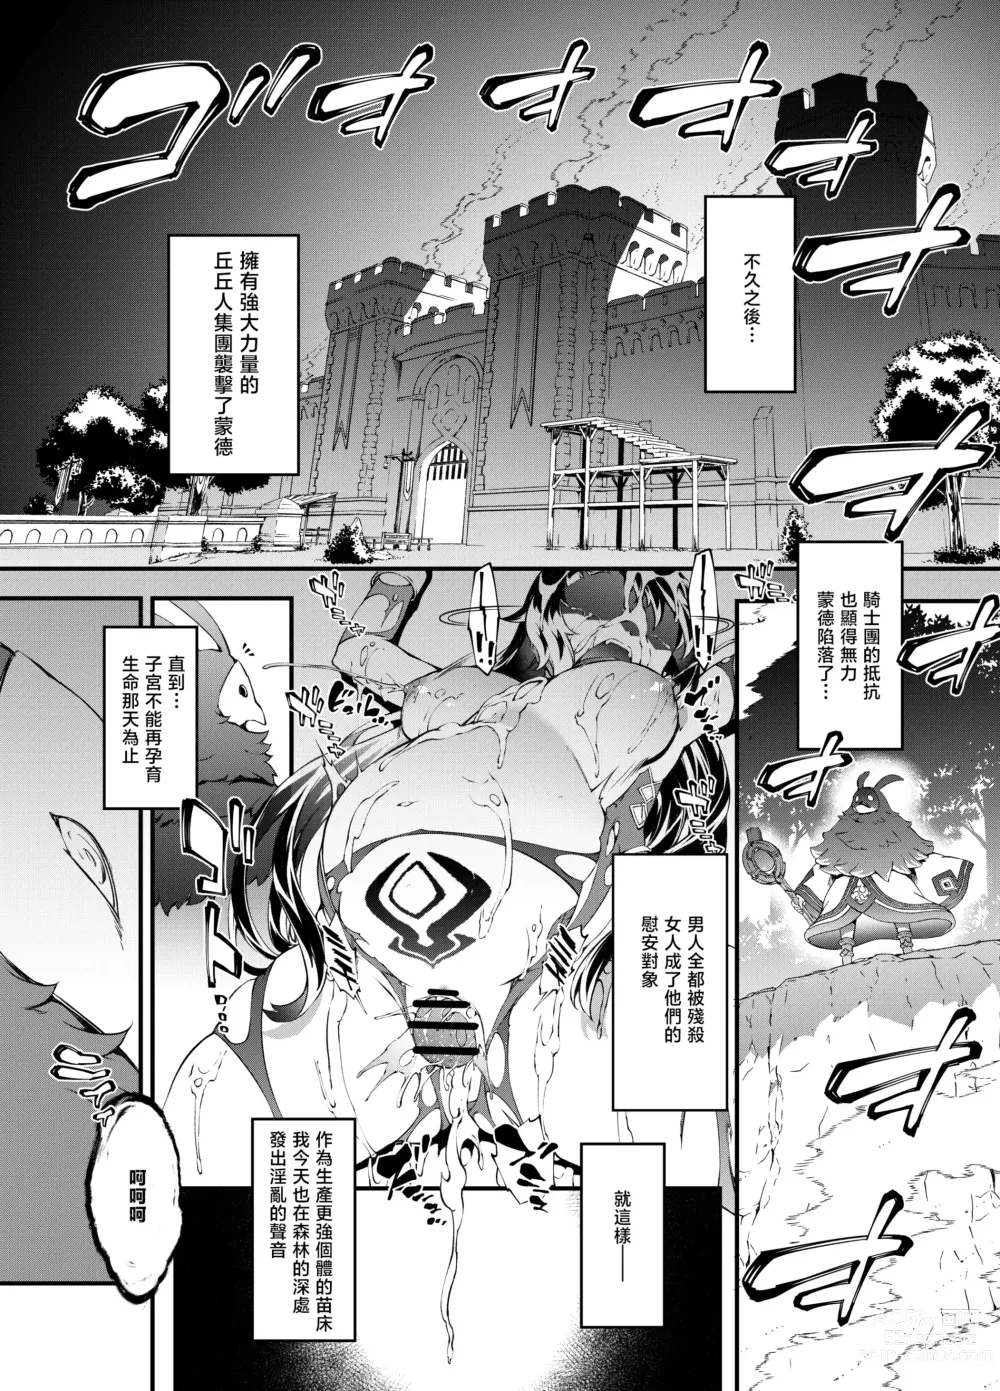 Page 33 of doujinshi 星辰坠落之日